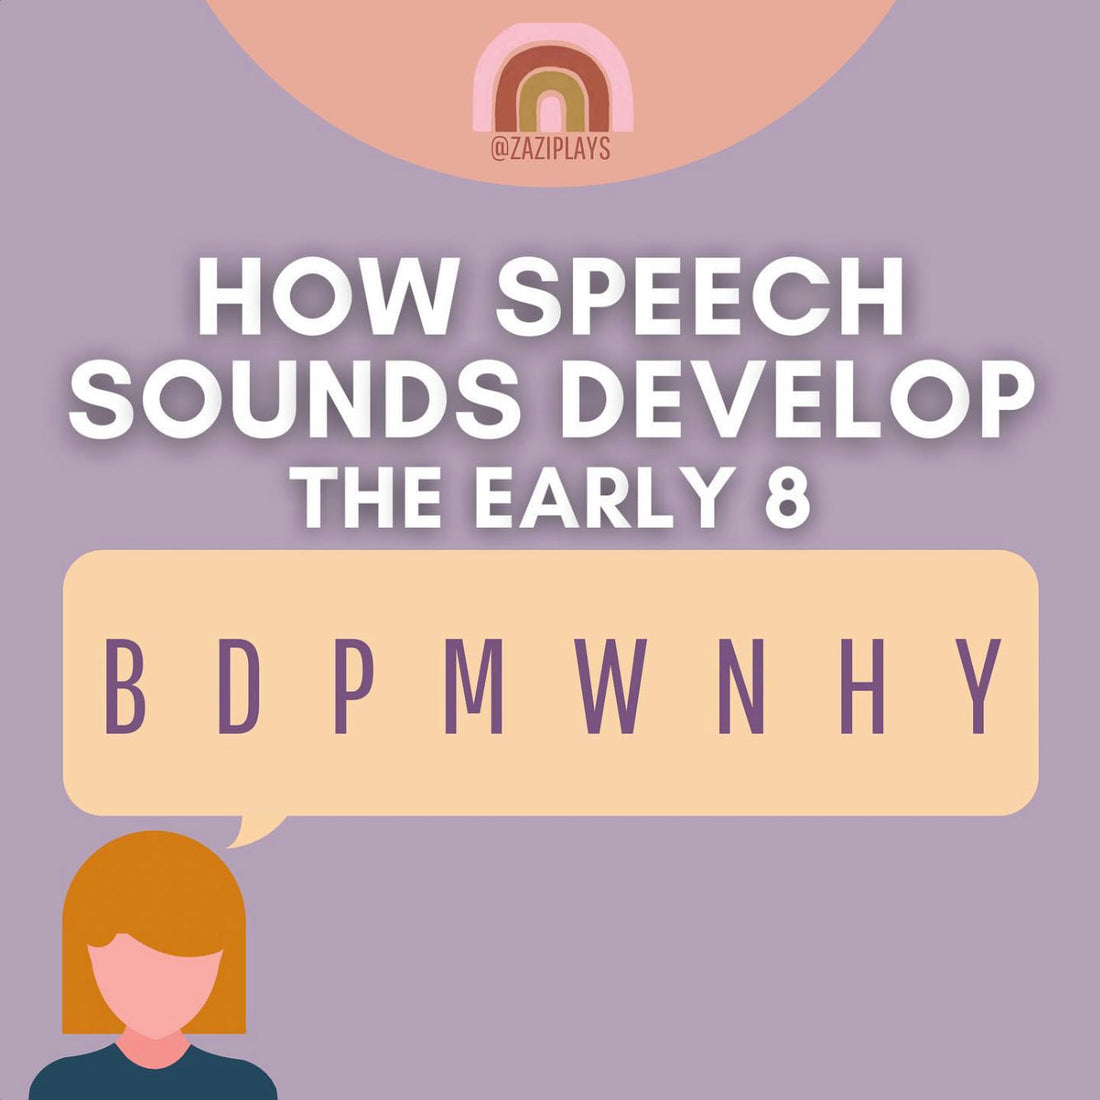 How speech sounds develop: The early 8